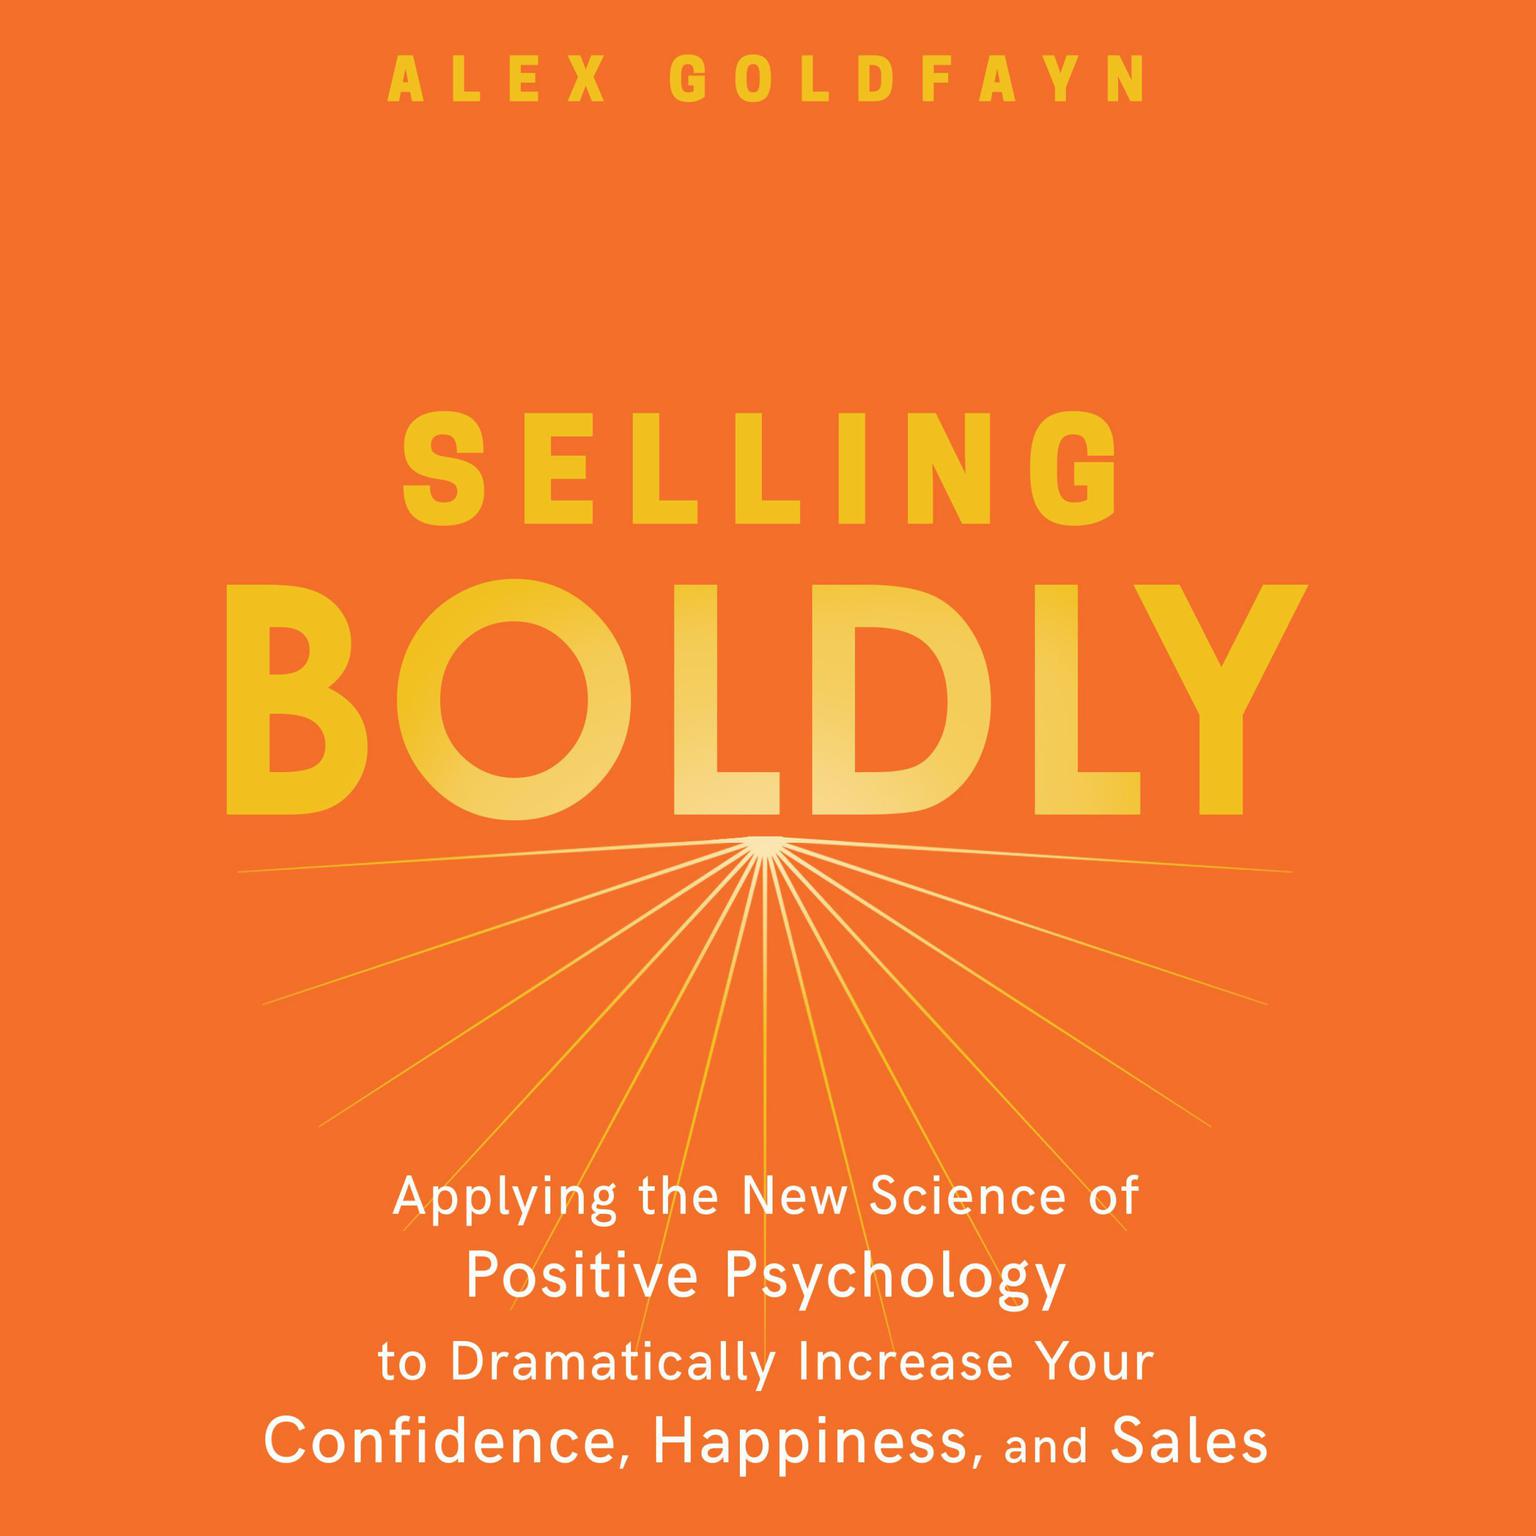 Selling Boldly: Applying the New Science of Positive Psychology to Dramatically Increase Your Confidence, Happiness, and Sales Audiobook, by Alex Goldfayn